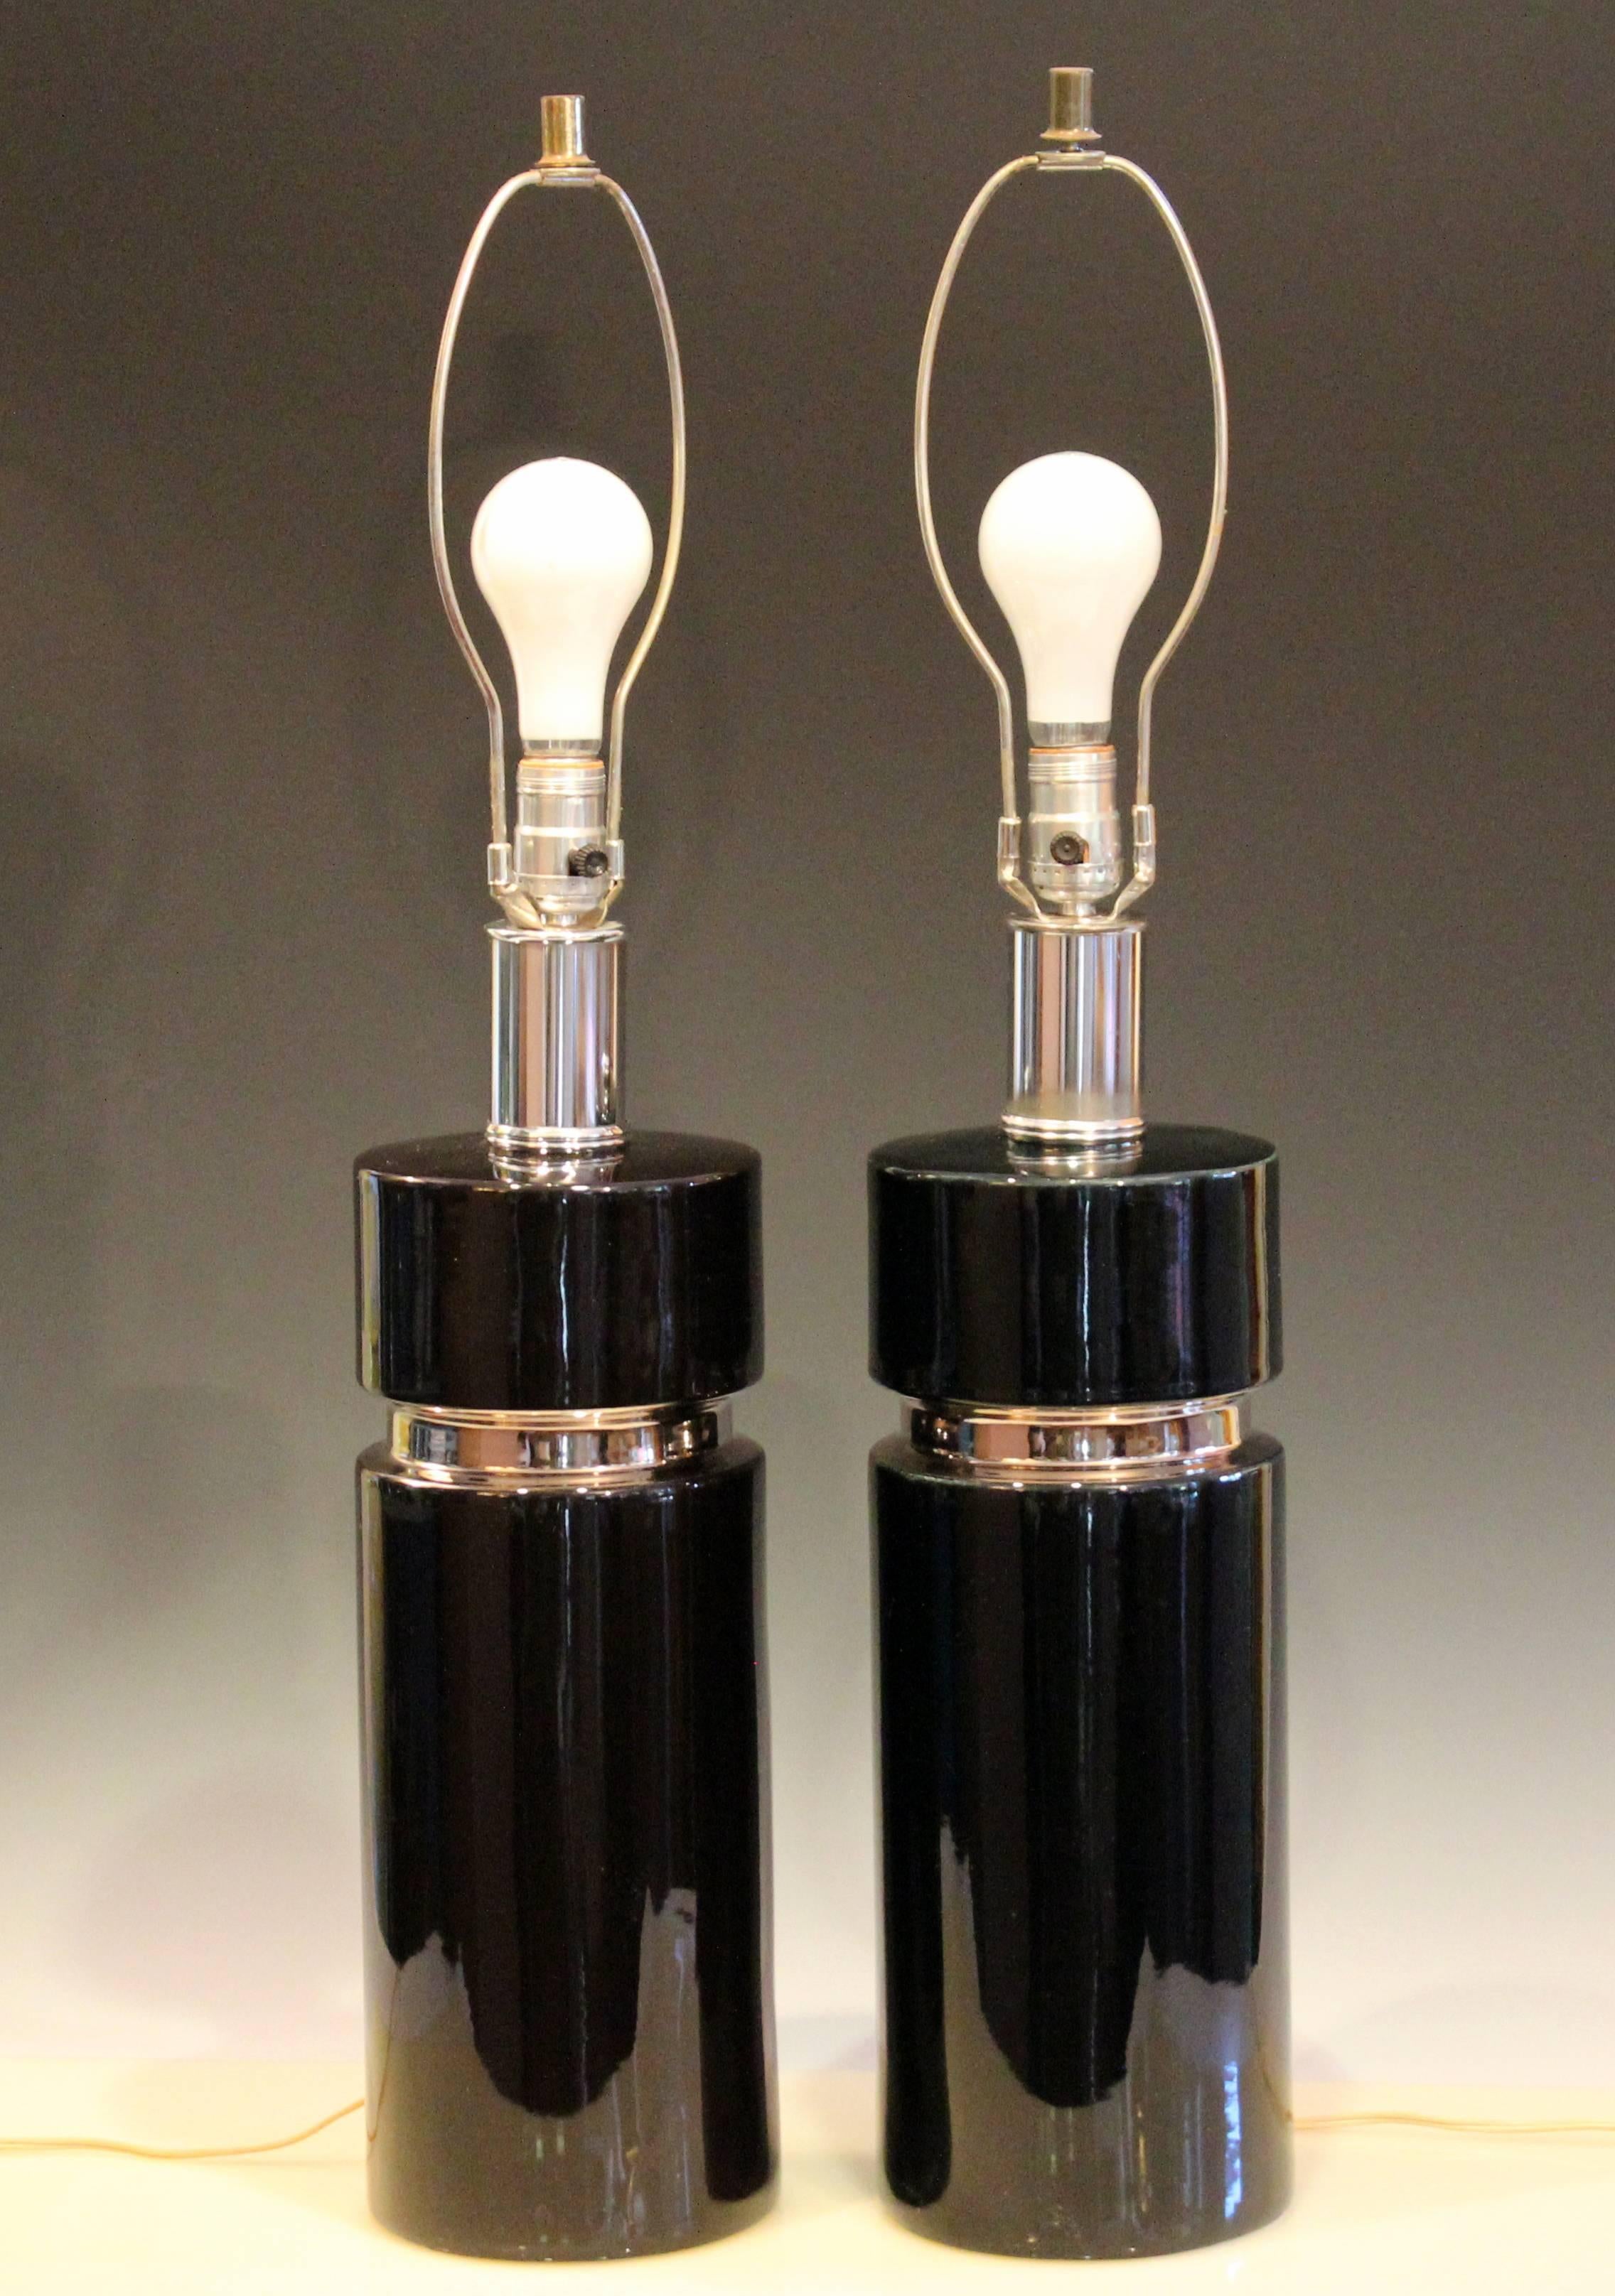 Pair of sleek vintage pottery lamps in gloss black glaze with platinum accents, circa 1970s-1980s. Measures: 34" high overall, 19" to socket, 6 1/2" diameter. Three way switches. Excellent vintage condition.